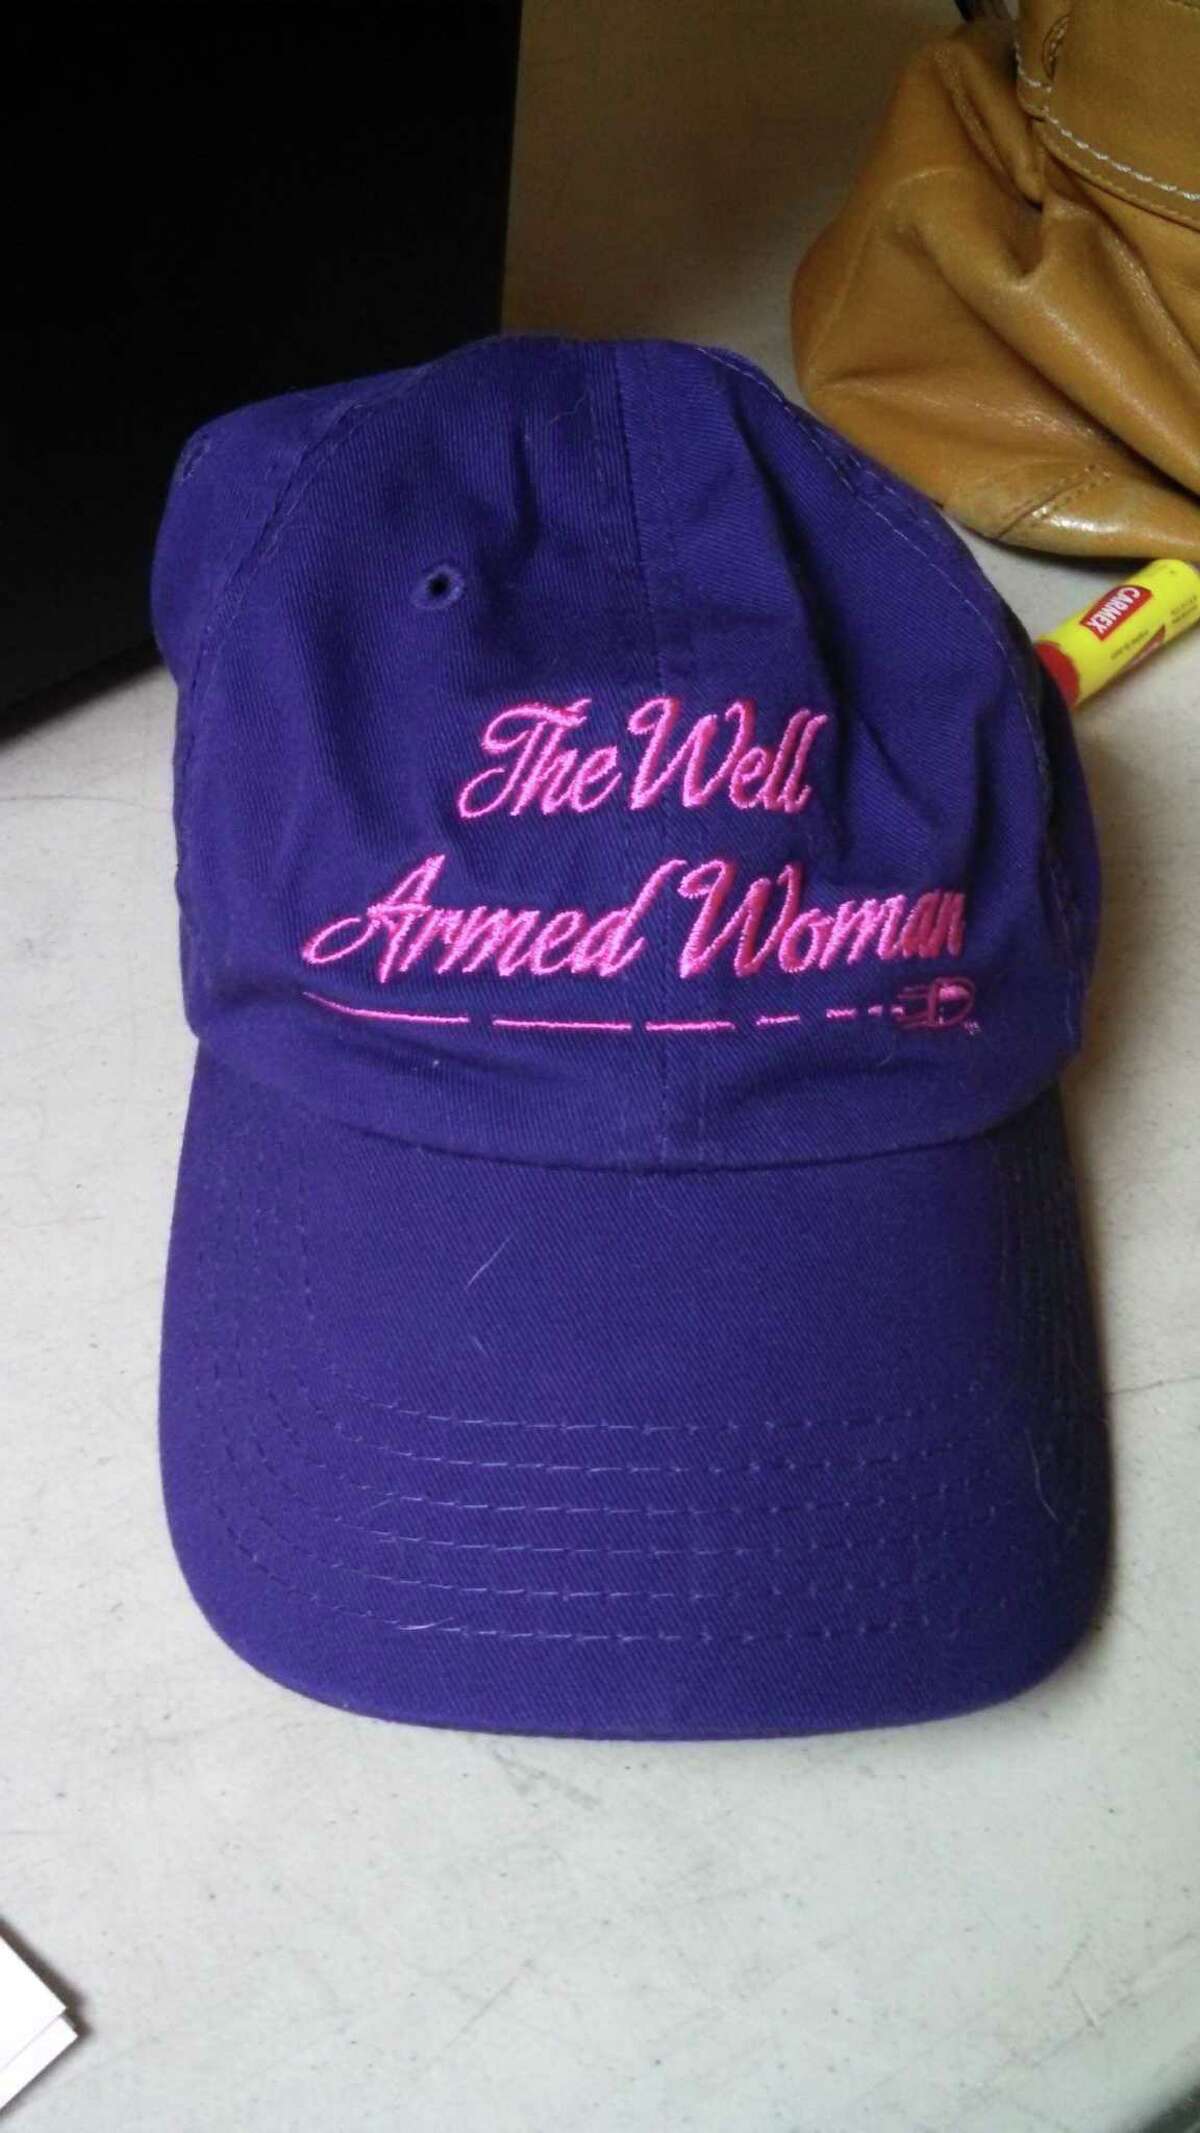 A purple cap with "A Well Armed Woman" embroidered on it on display at the Iroquois Rod and Gun Club. (Leigh Hornbeck/Times Union)